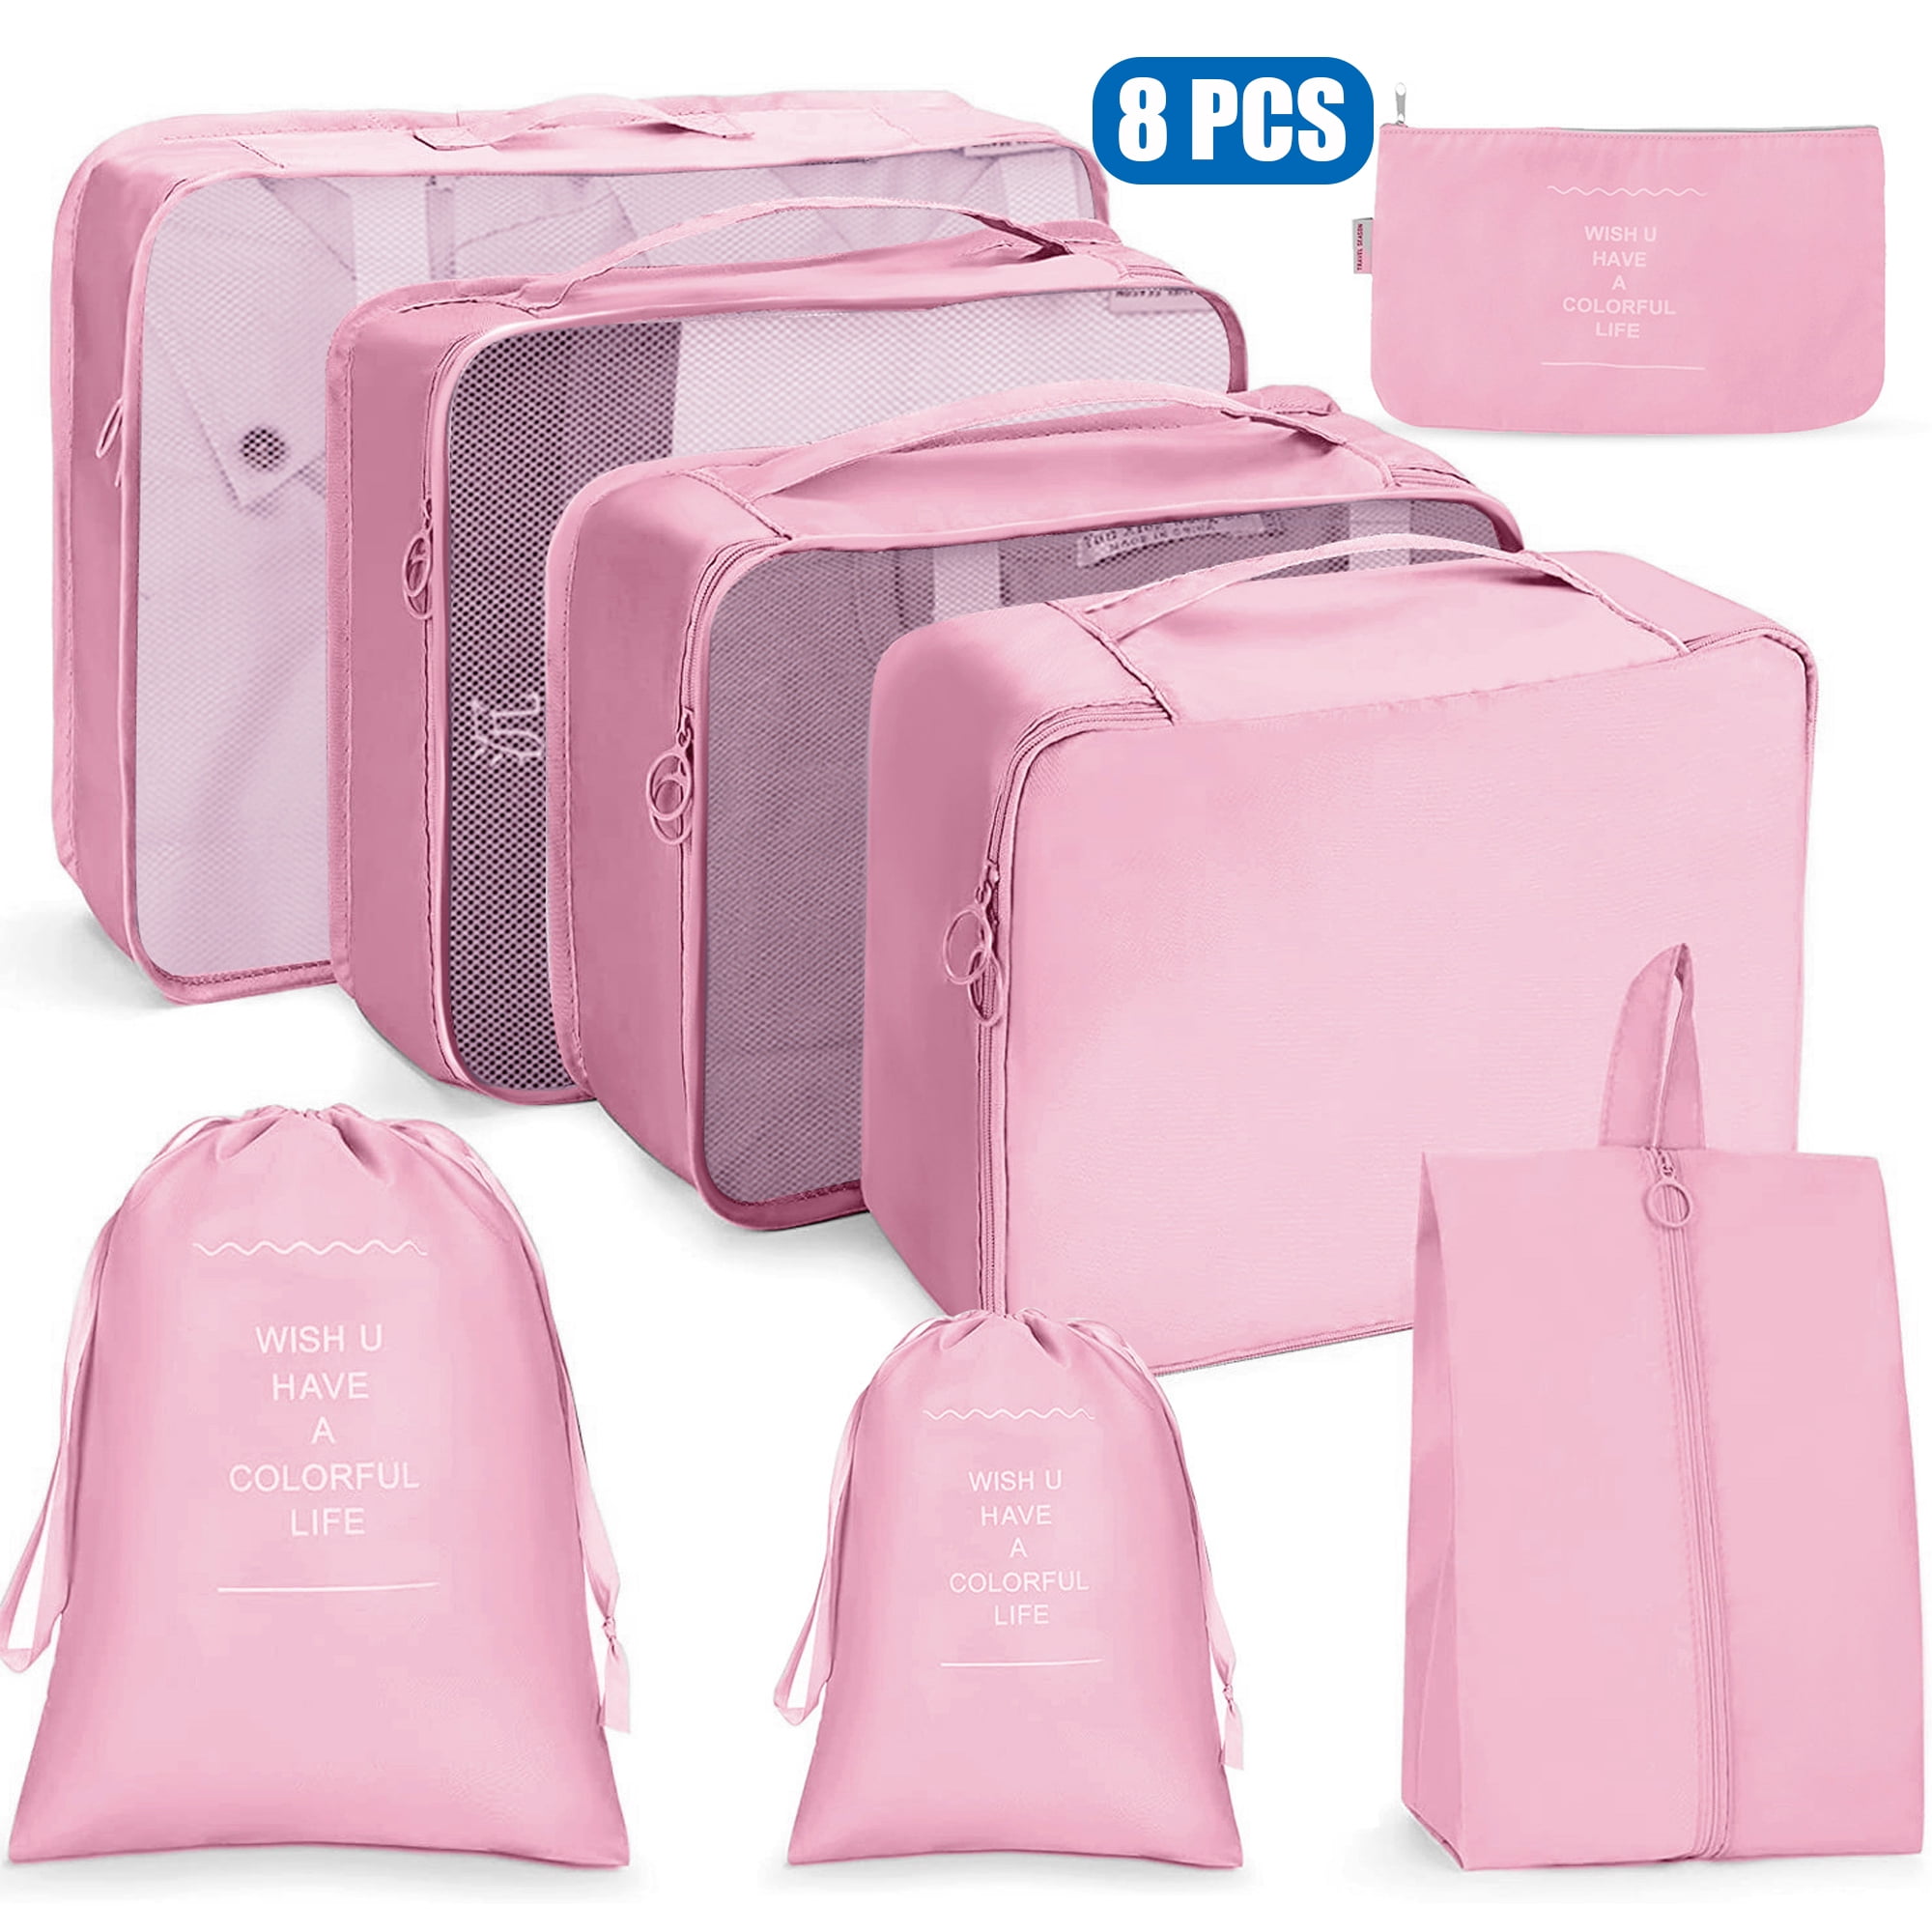 Packing Cubes for Luggage, Compression Packing Cubes Travel Luggage Organiser Bag, Foldable Large Capacity Waterproof Suitcase Storage, 8 Pcs Pink